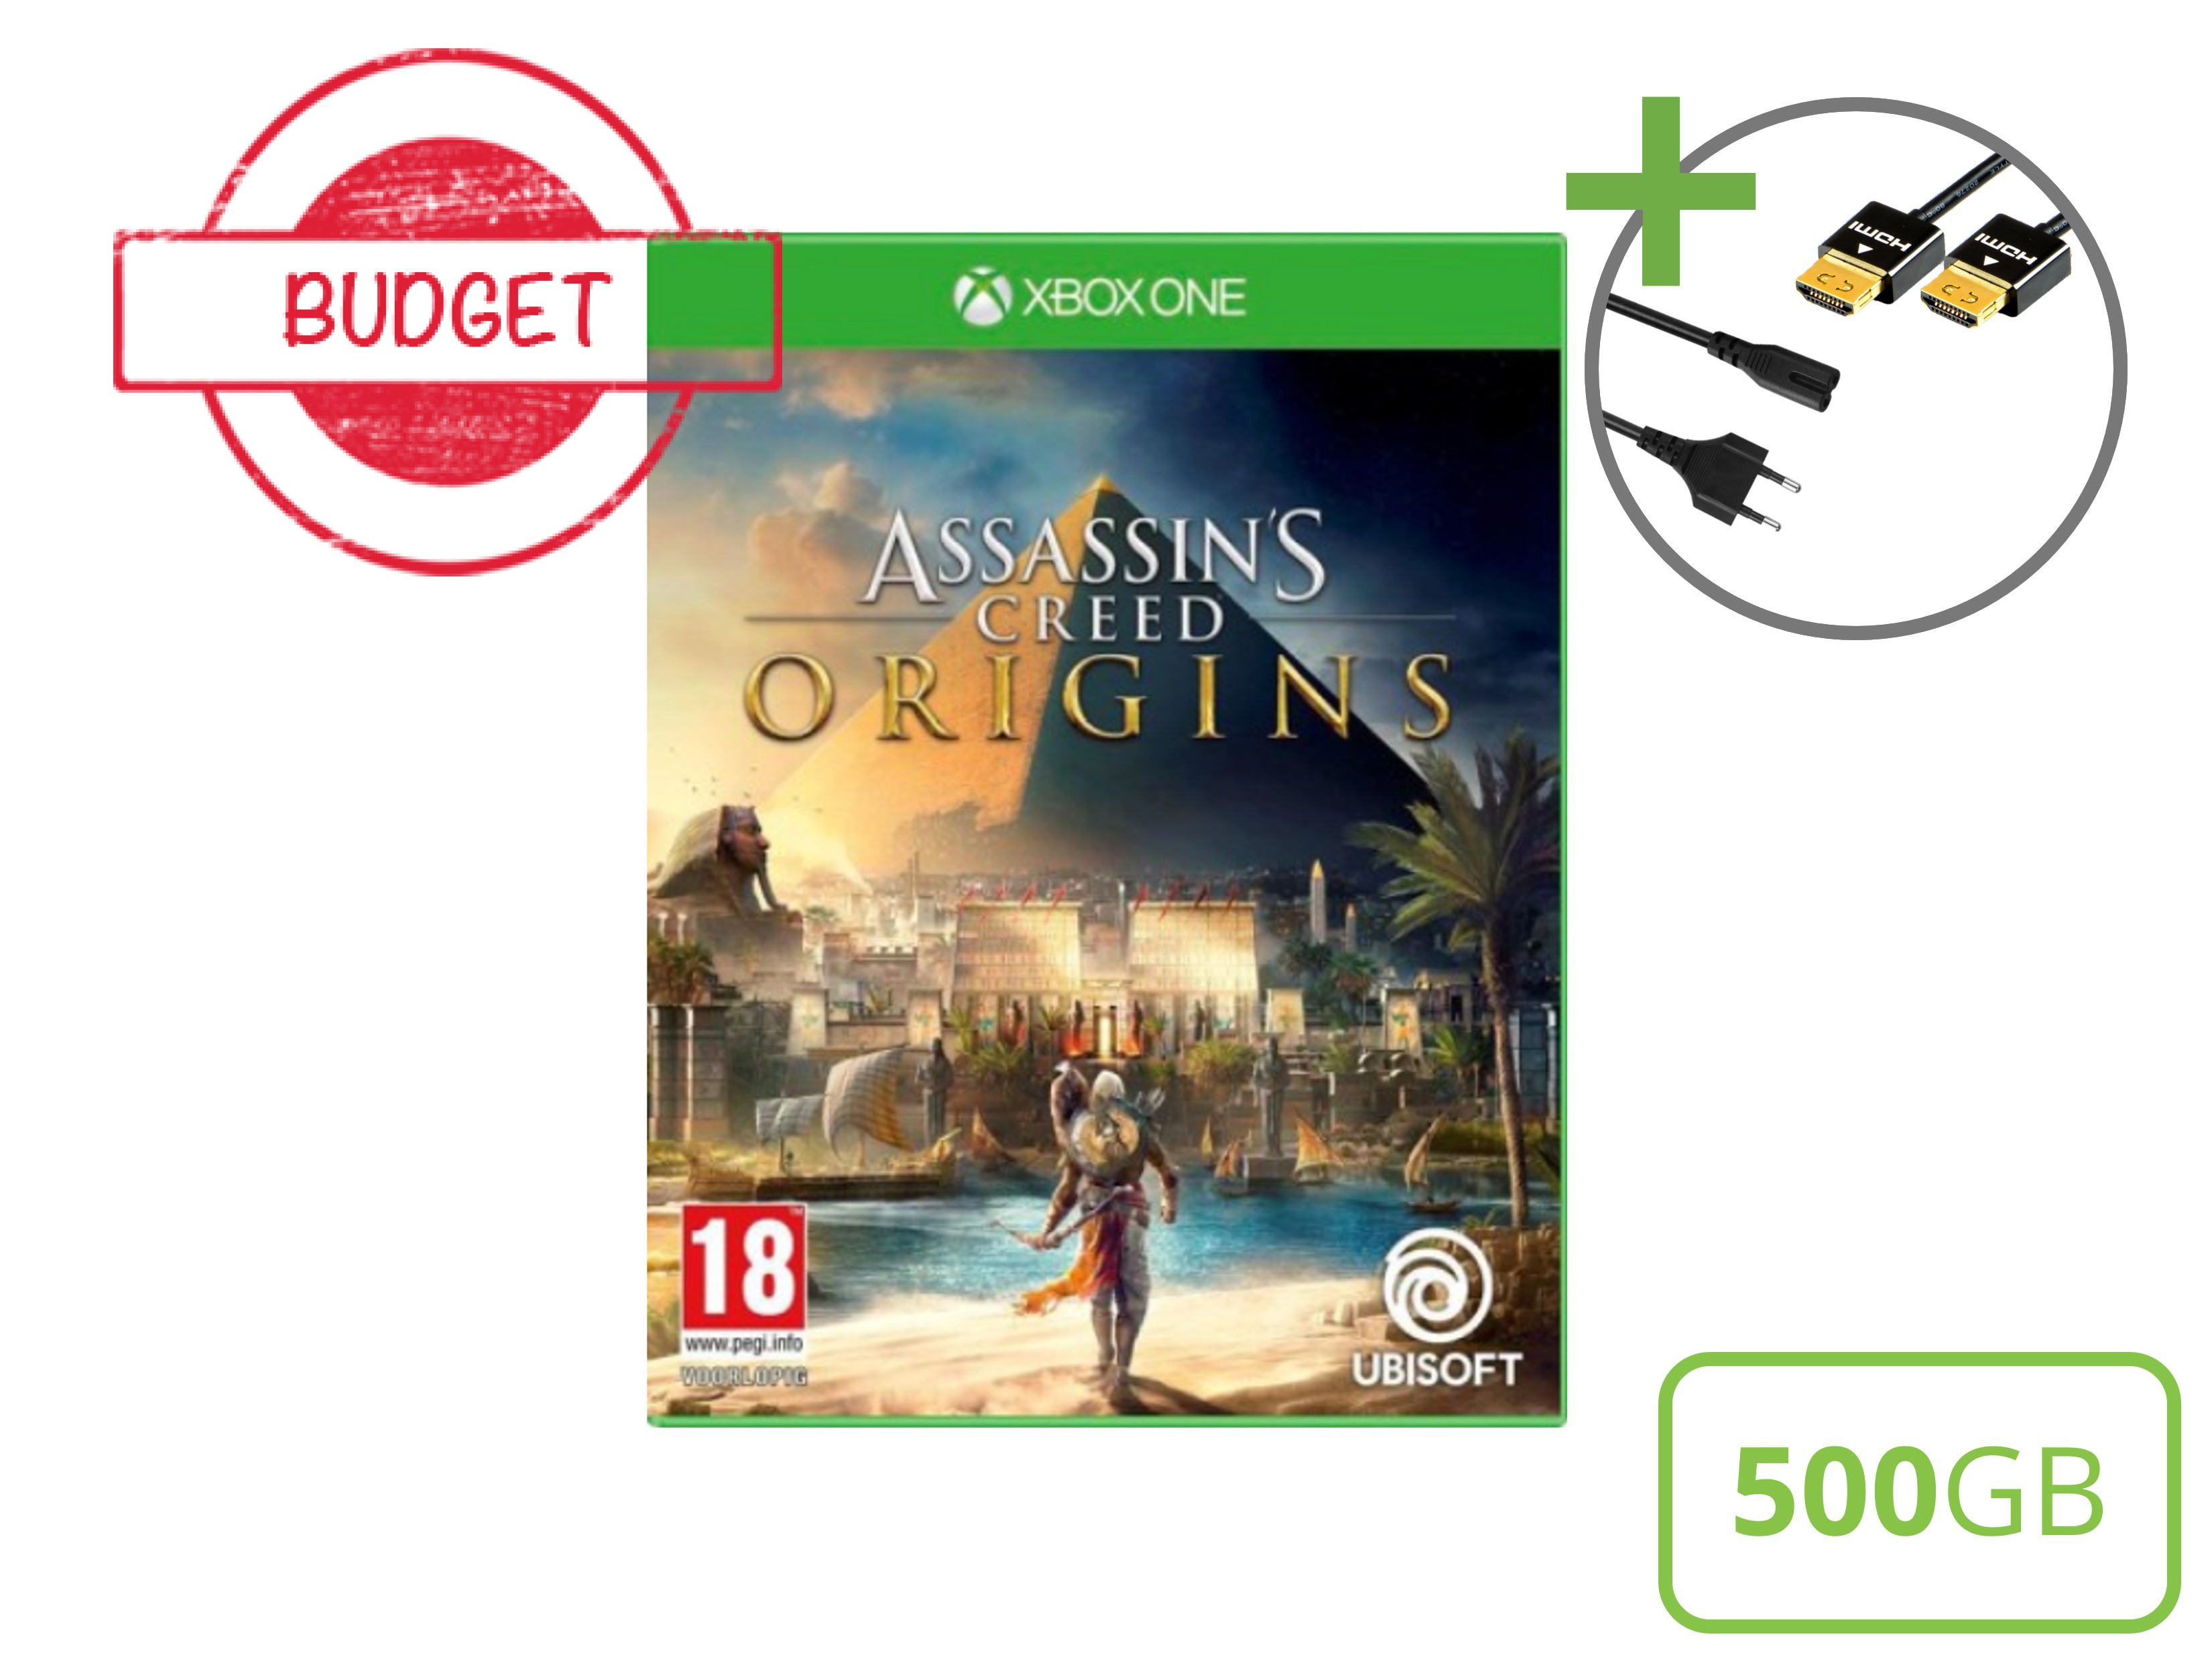 Microsoft Xbox One S Starter Pack - 500GB Assassin's Creed Origins Edition - Budget - Xbox One Hardware - 4